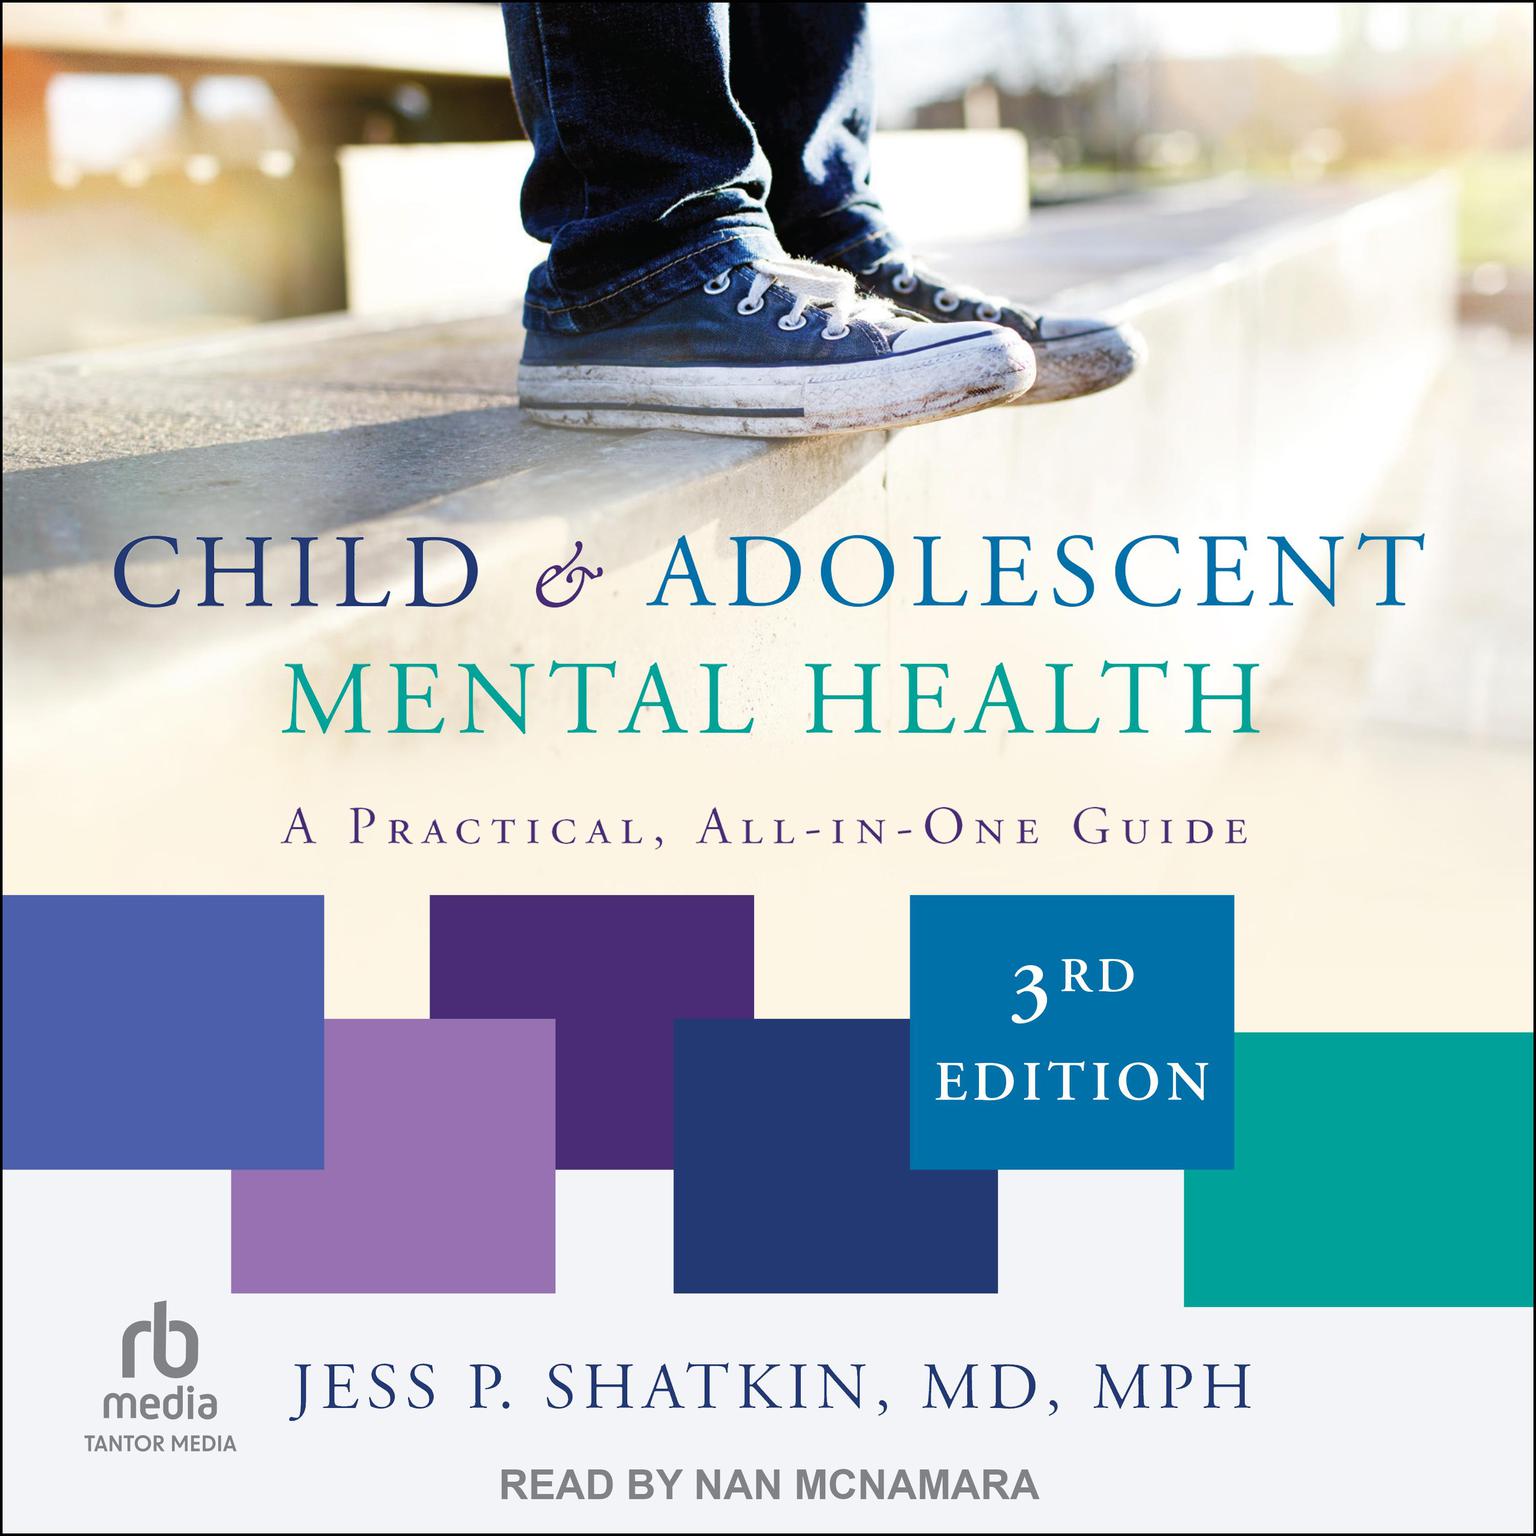 Child & Adolescent Mental Health: A Practical, All-in-One Guide, Third Edition Audiobook, by Jess P. Shatkin, MD, MPH